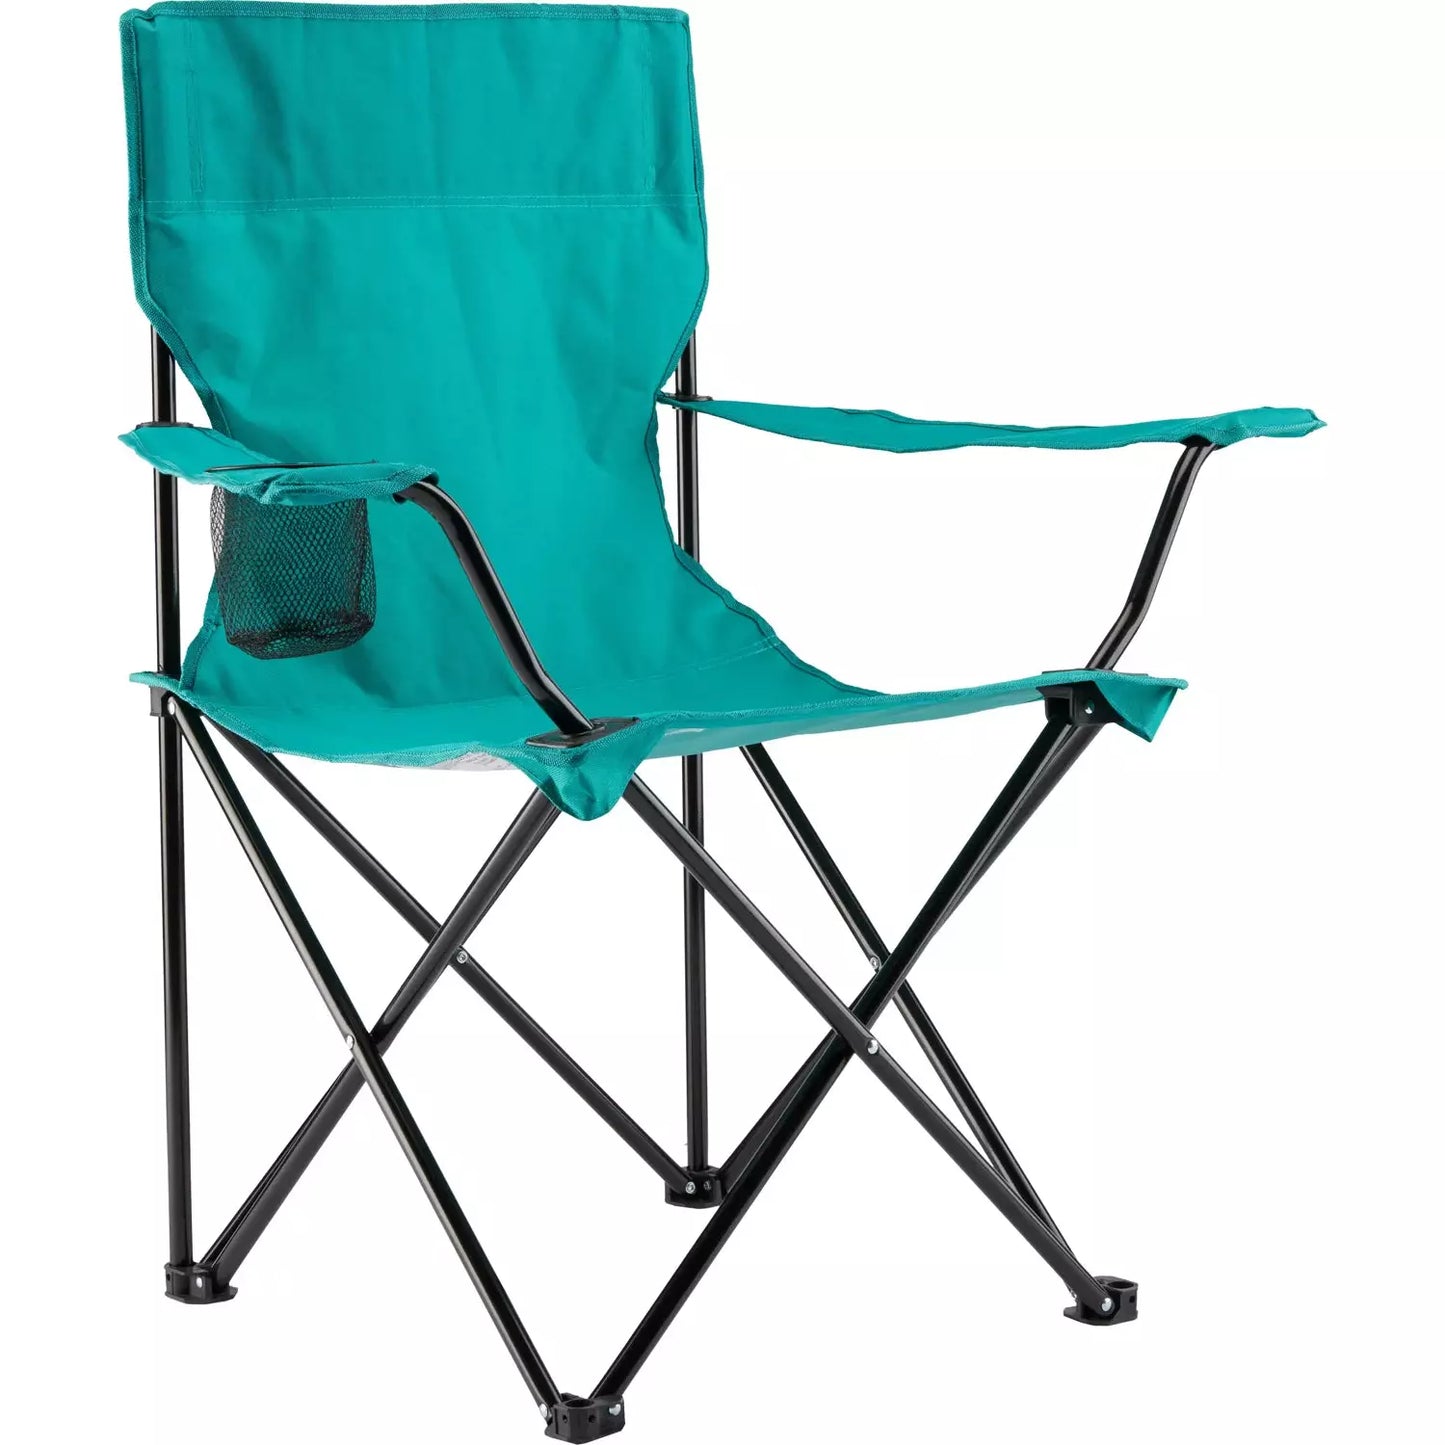 Torquoise Camping Chair